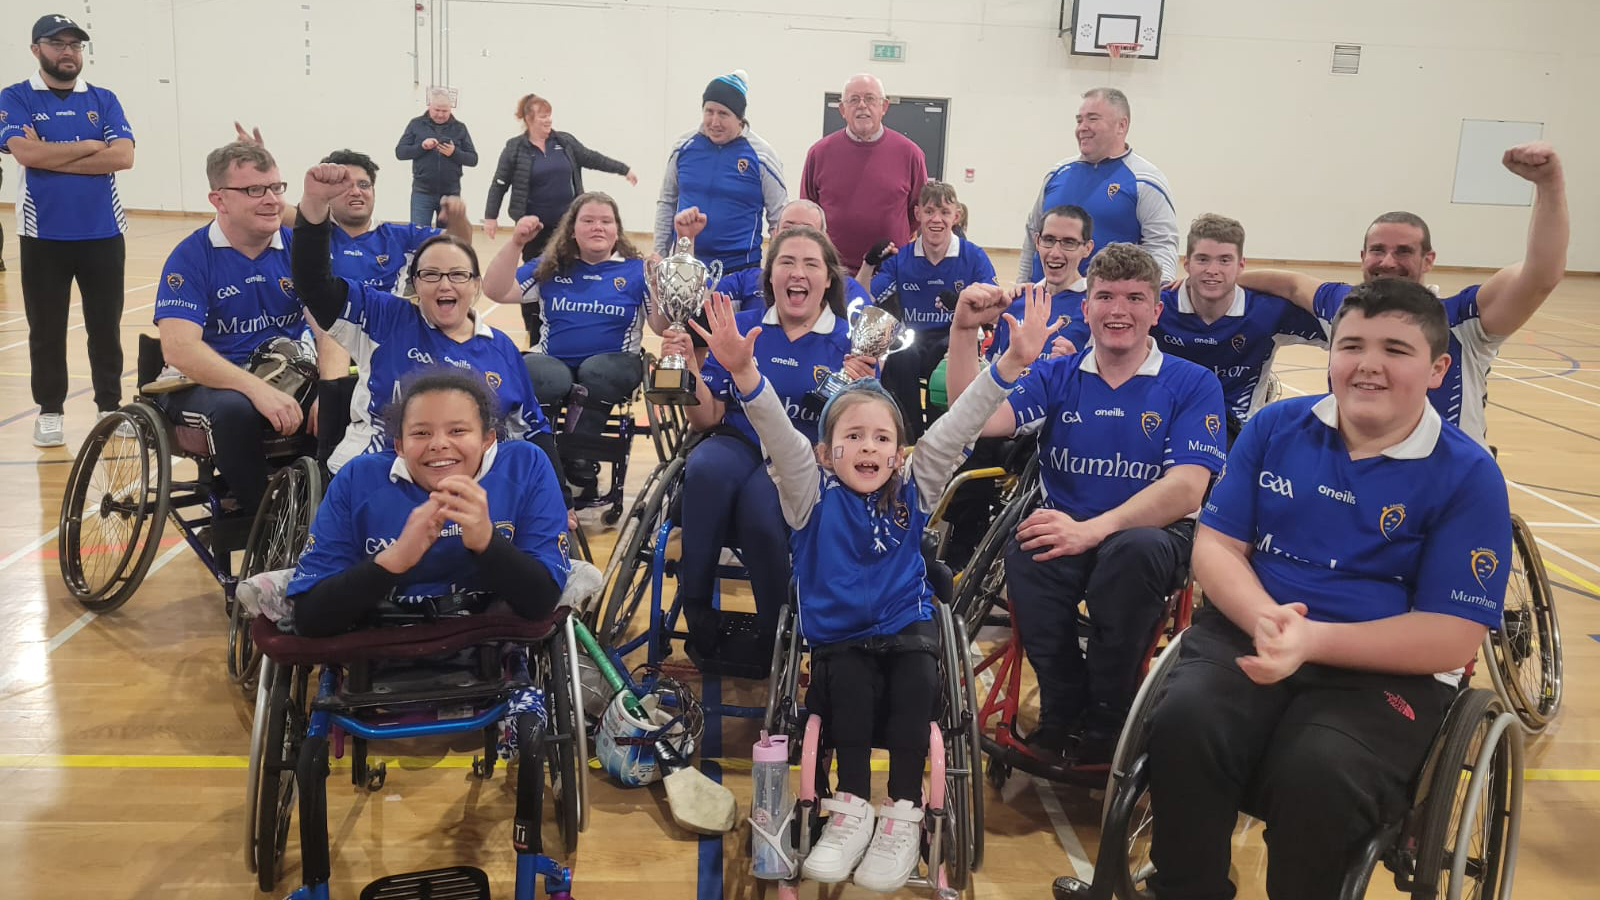 Munster win All-Ireland Wheelchair Hurling / Camogie title